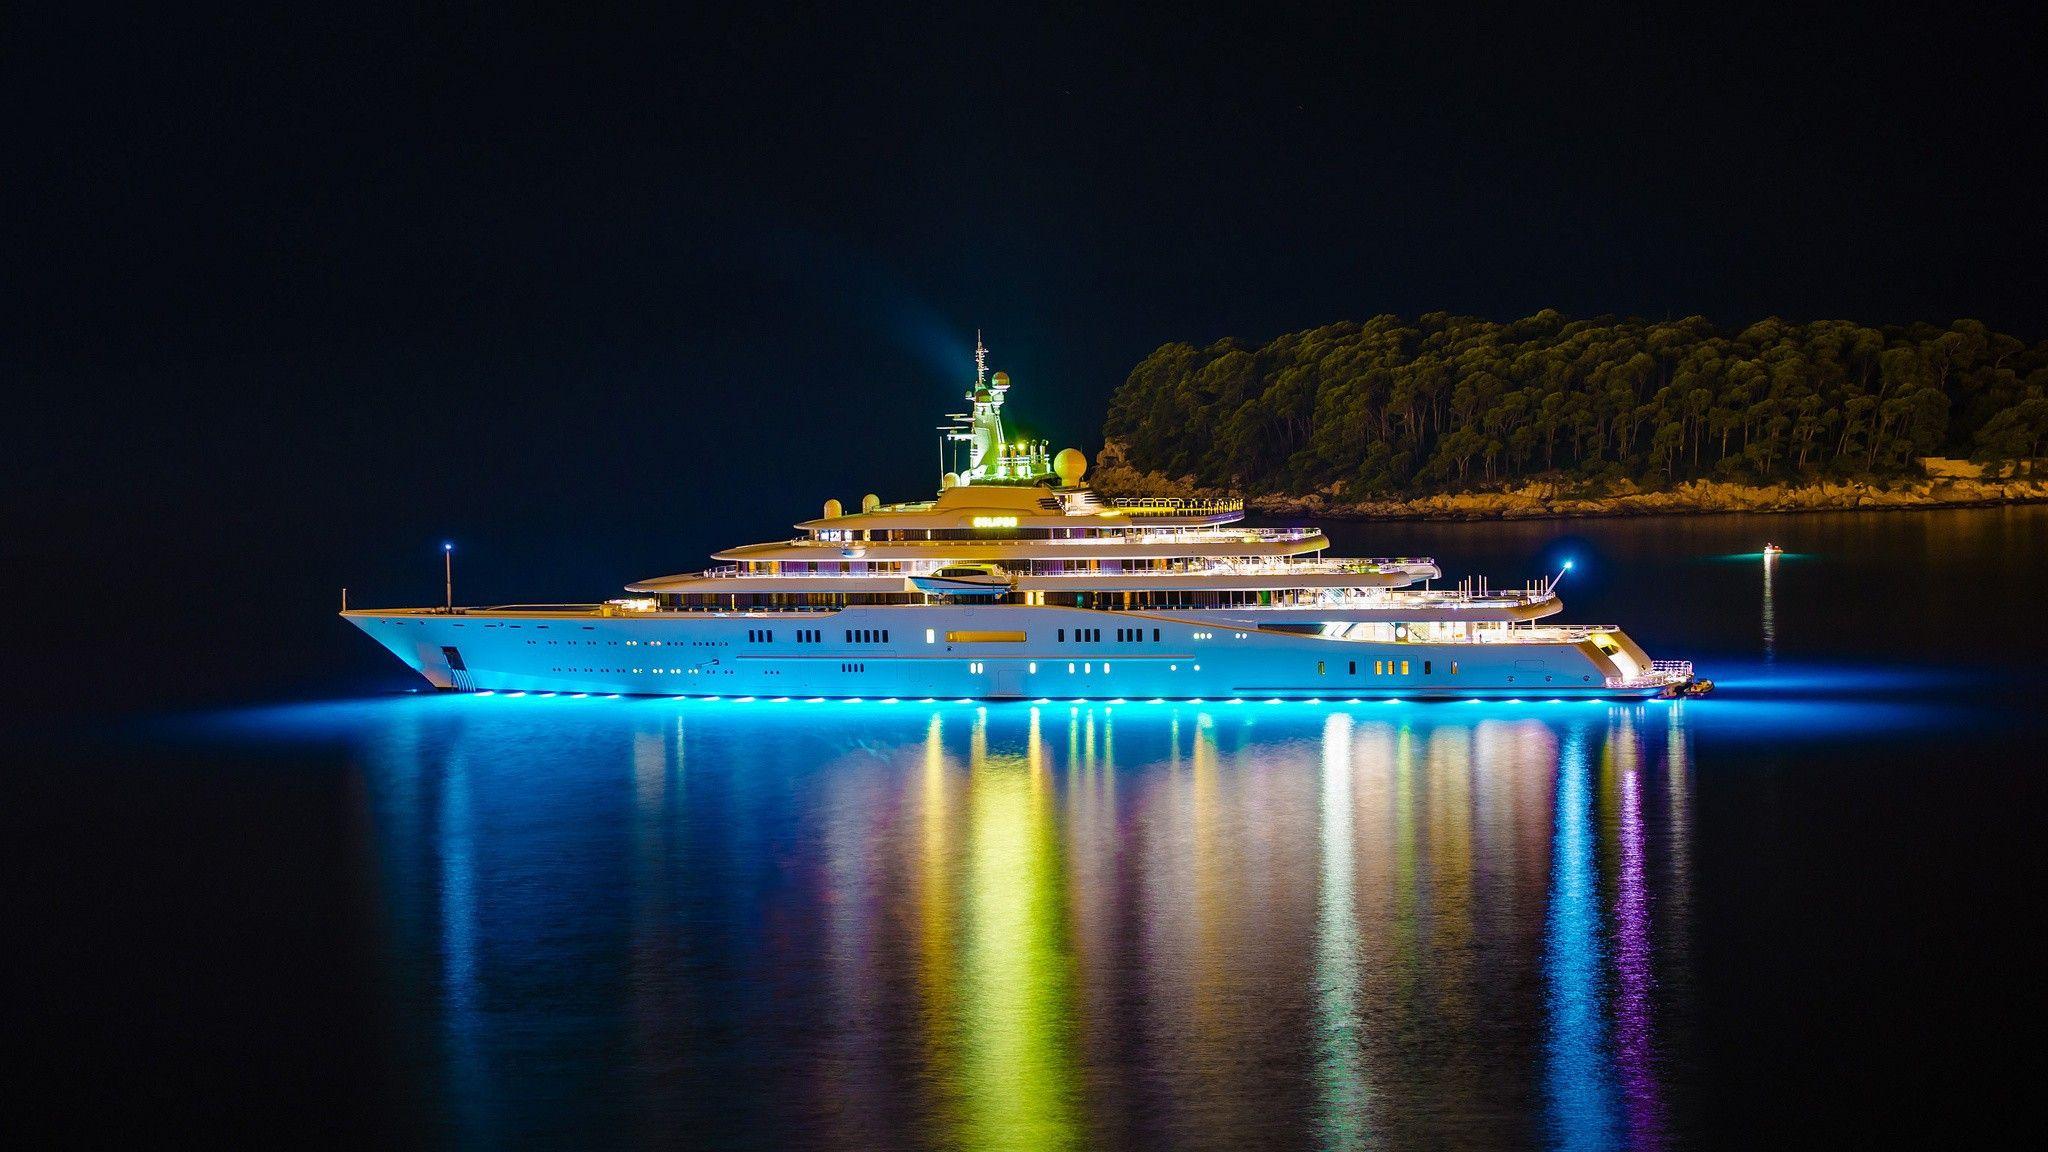 Bright lighting private yacht wallpaper and image